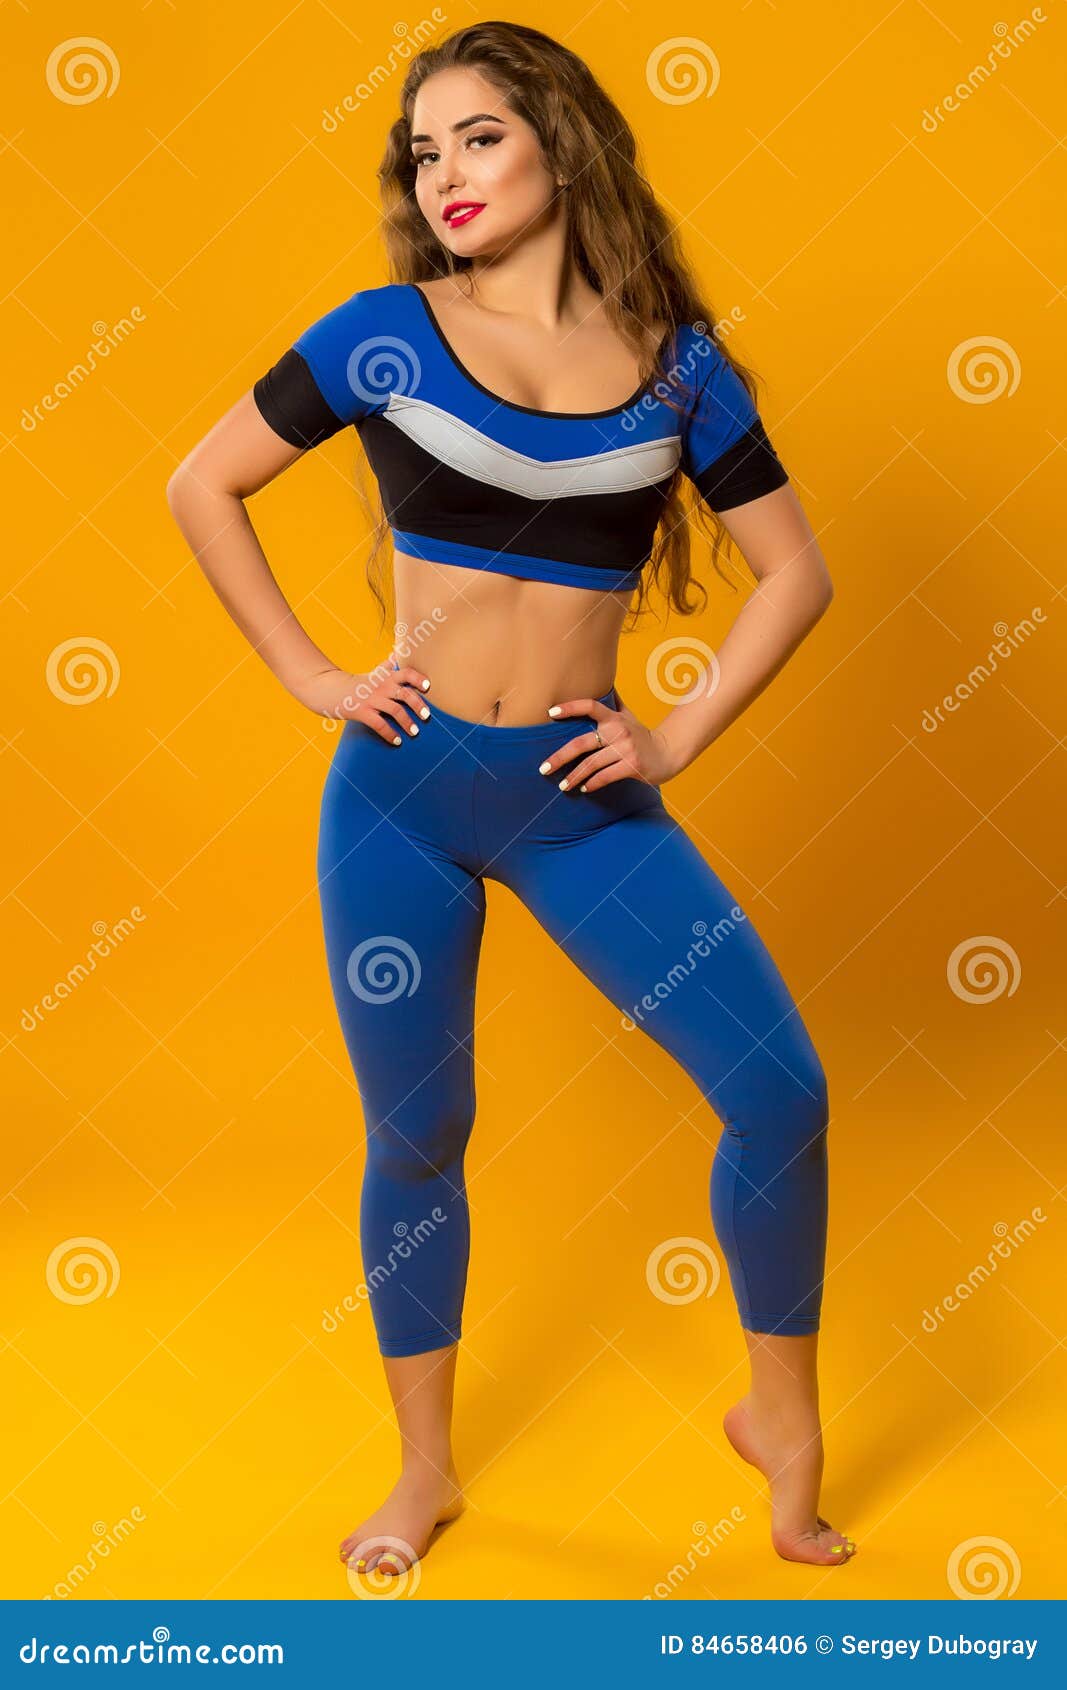 Beautiful Sports Girl Gymnast in Blue Sport Dress Posing Stock Photo -  Image of healthy, emotion: 84658406